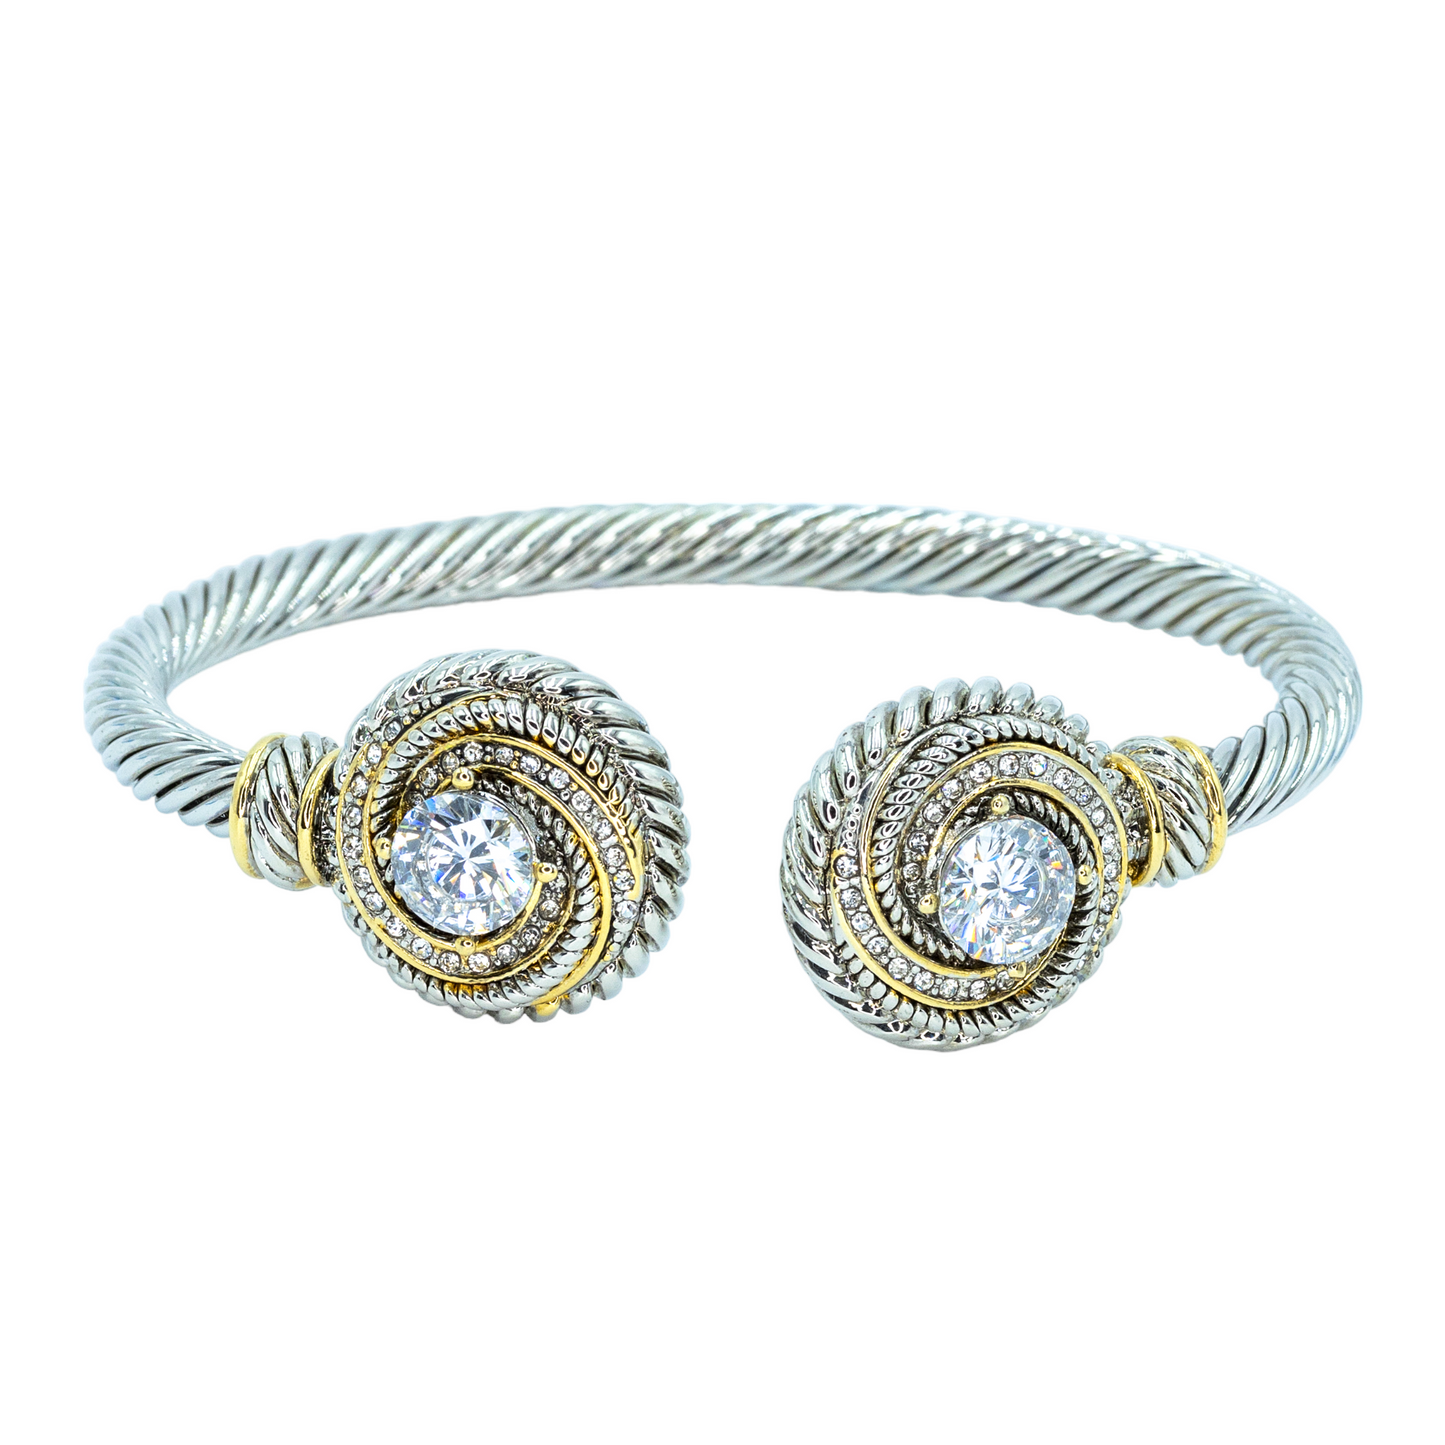 Rhodium plated two toned round clear stone bangle